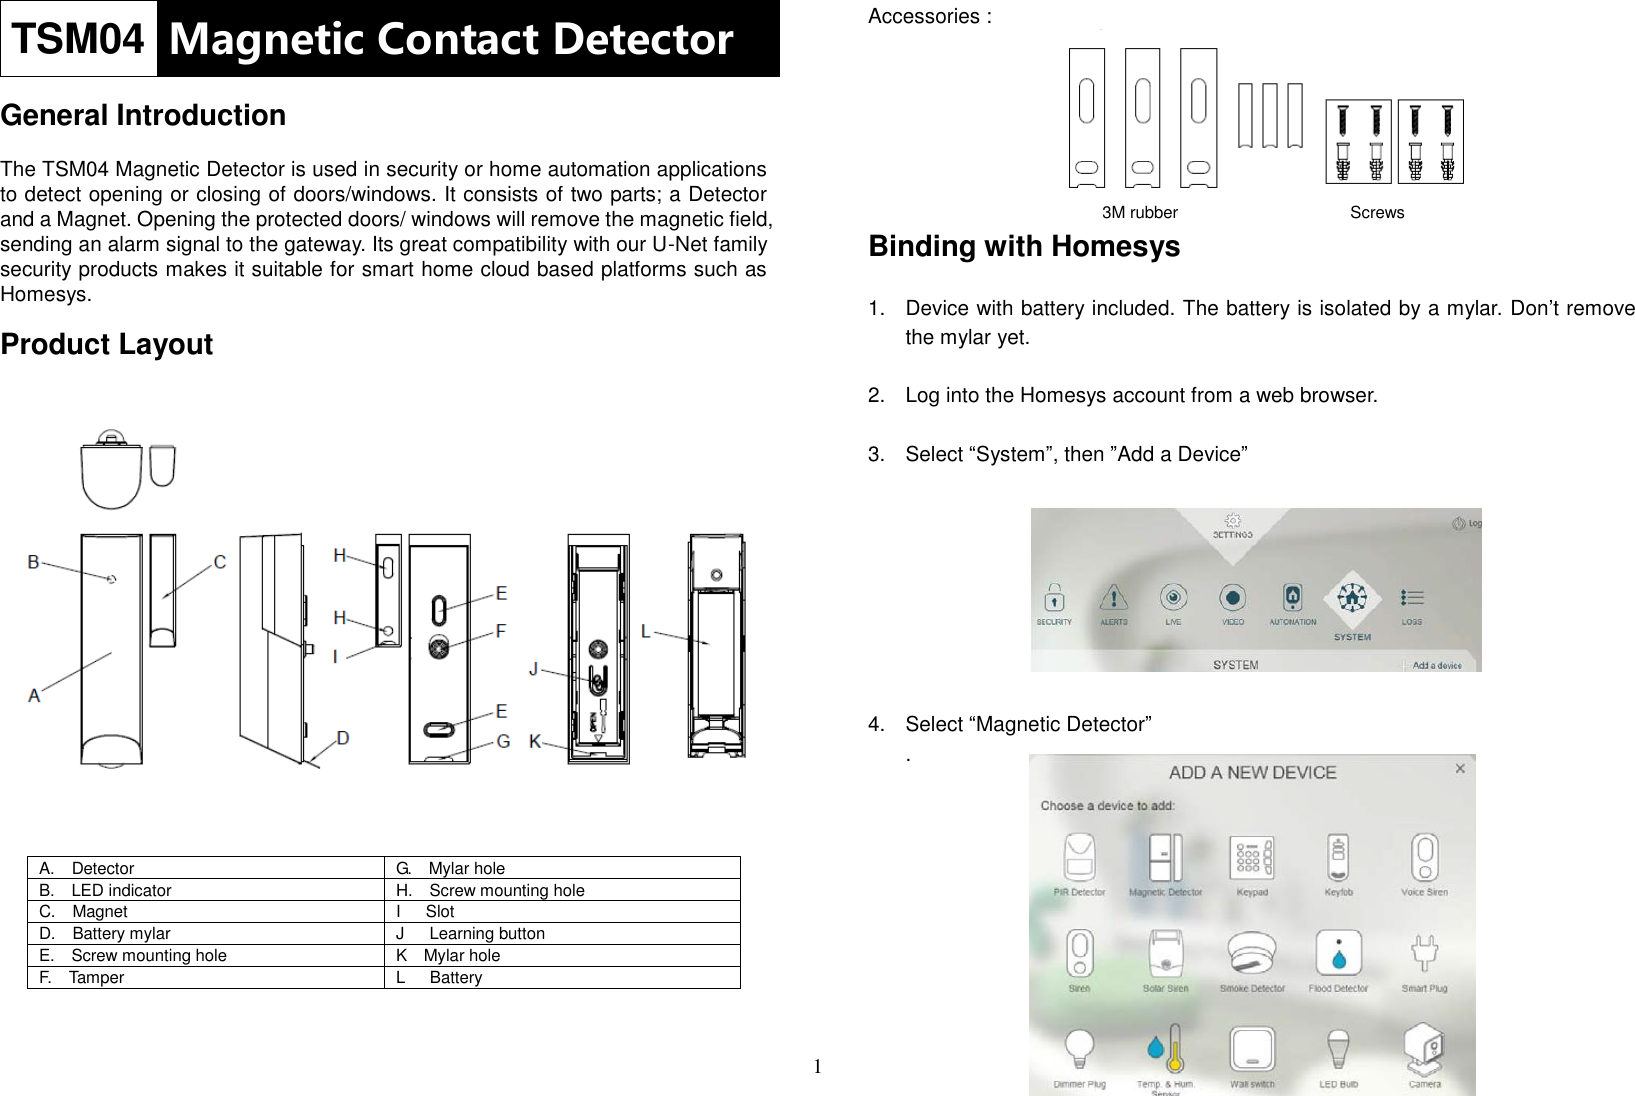 1 TSM04 Magnetic Contact Detector  General Introduction  The TSM04 Magnetic Detector is used in security or home automation applications to detect opening or closing of doors/windows. It consists of two parts; a Detector and a Magnet. Opening the protected doors/ windows will remove the magnetic field, sending an alarm signal to the gateway. Its great compatibility with our U-Net family security products makes it suitable for smart home cloud based platforms such as Homesys.  Product Layout                                  A.    Detector G.    Mylar hole B.    LED indicator H.    Screw mounting hole C.    Magnet I      Slot D.    Battery mylar J      Learning button E.    Screw mounting hole K    Mylar hole F.    Tamper L      Battery   Accessories :         Binding with Homesys  1.  Device with battery included. The battery is isolated by a mylar. Don’t remove the mylar yet.  2.  Log into the Homesys account from a web browser.  3.  Select “System”, then ”Add a Device”         4.  Select “Magnetic Detector” .          3M rubber Screws 